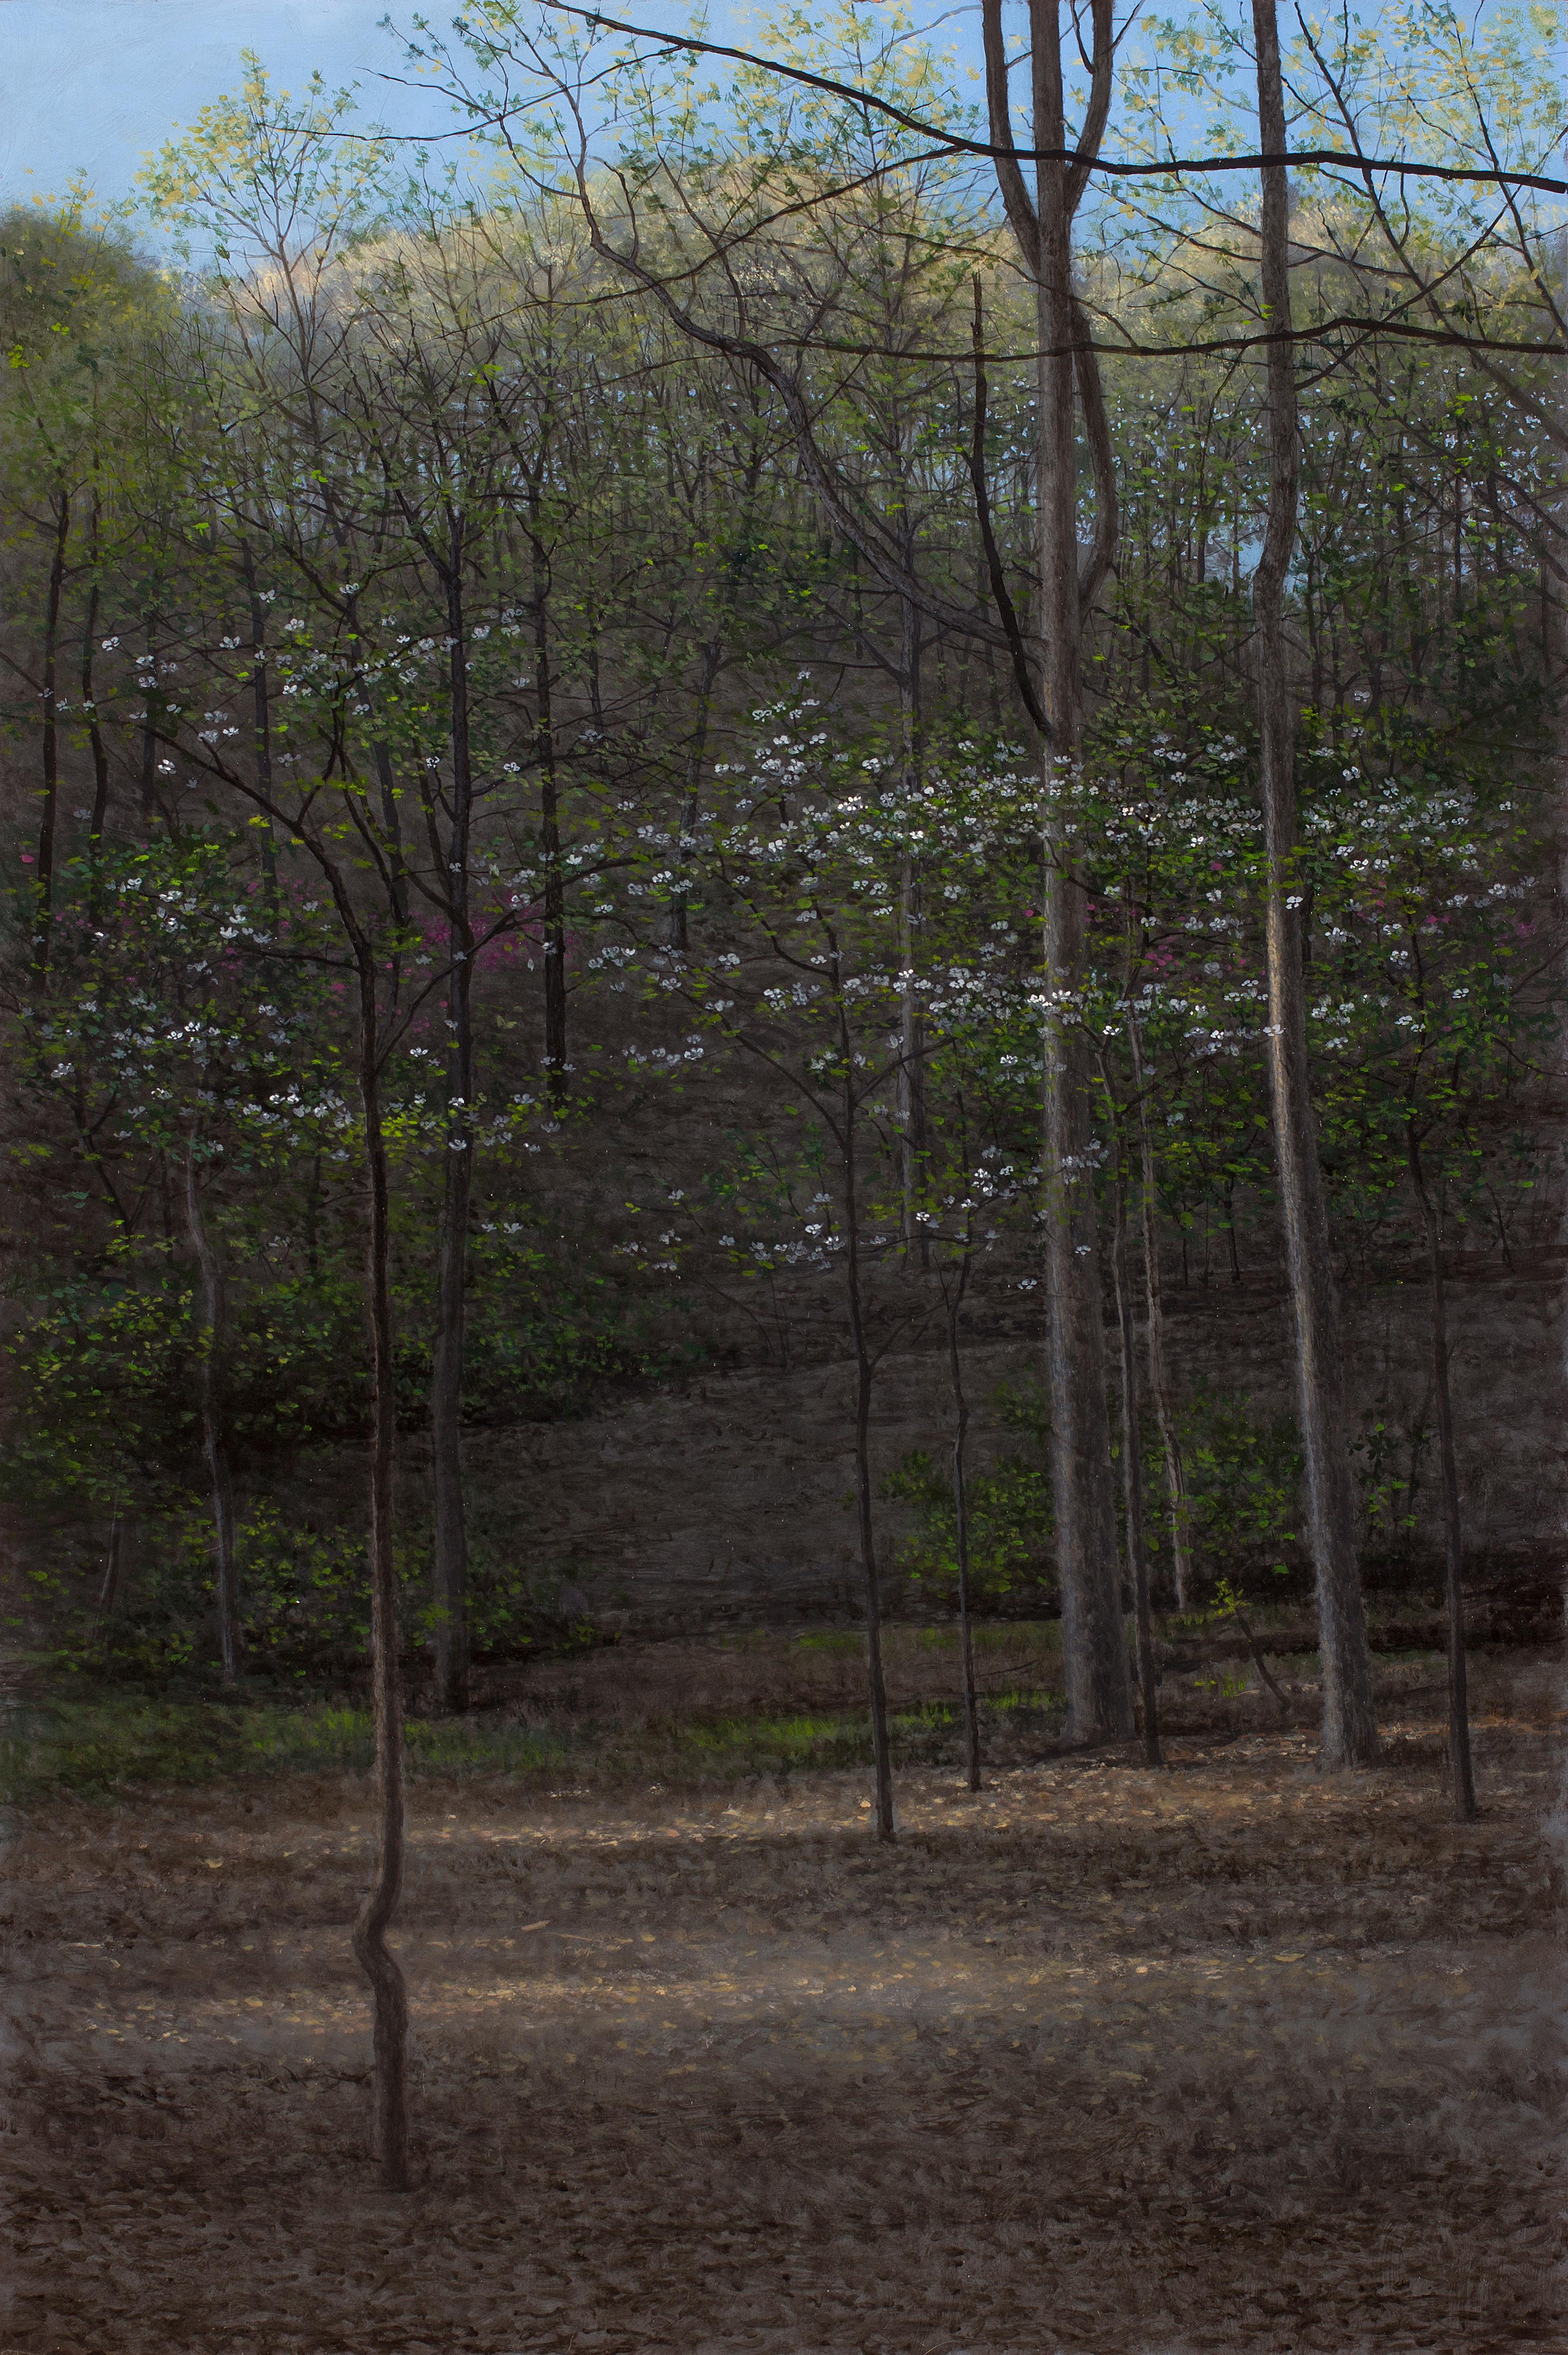 Dogwoods, Flowering Dogwood Trees in a Wooded Landscape, Oil on Panel - Painting by Jeff Aeling